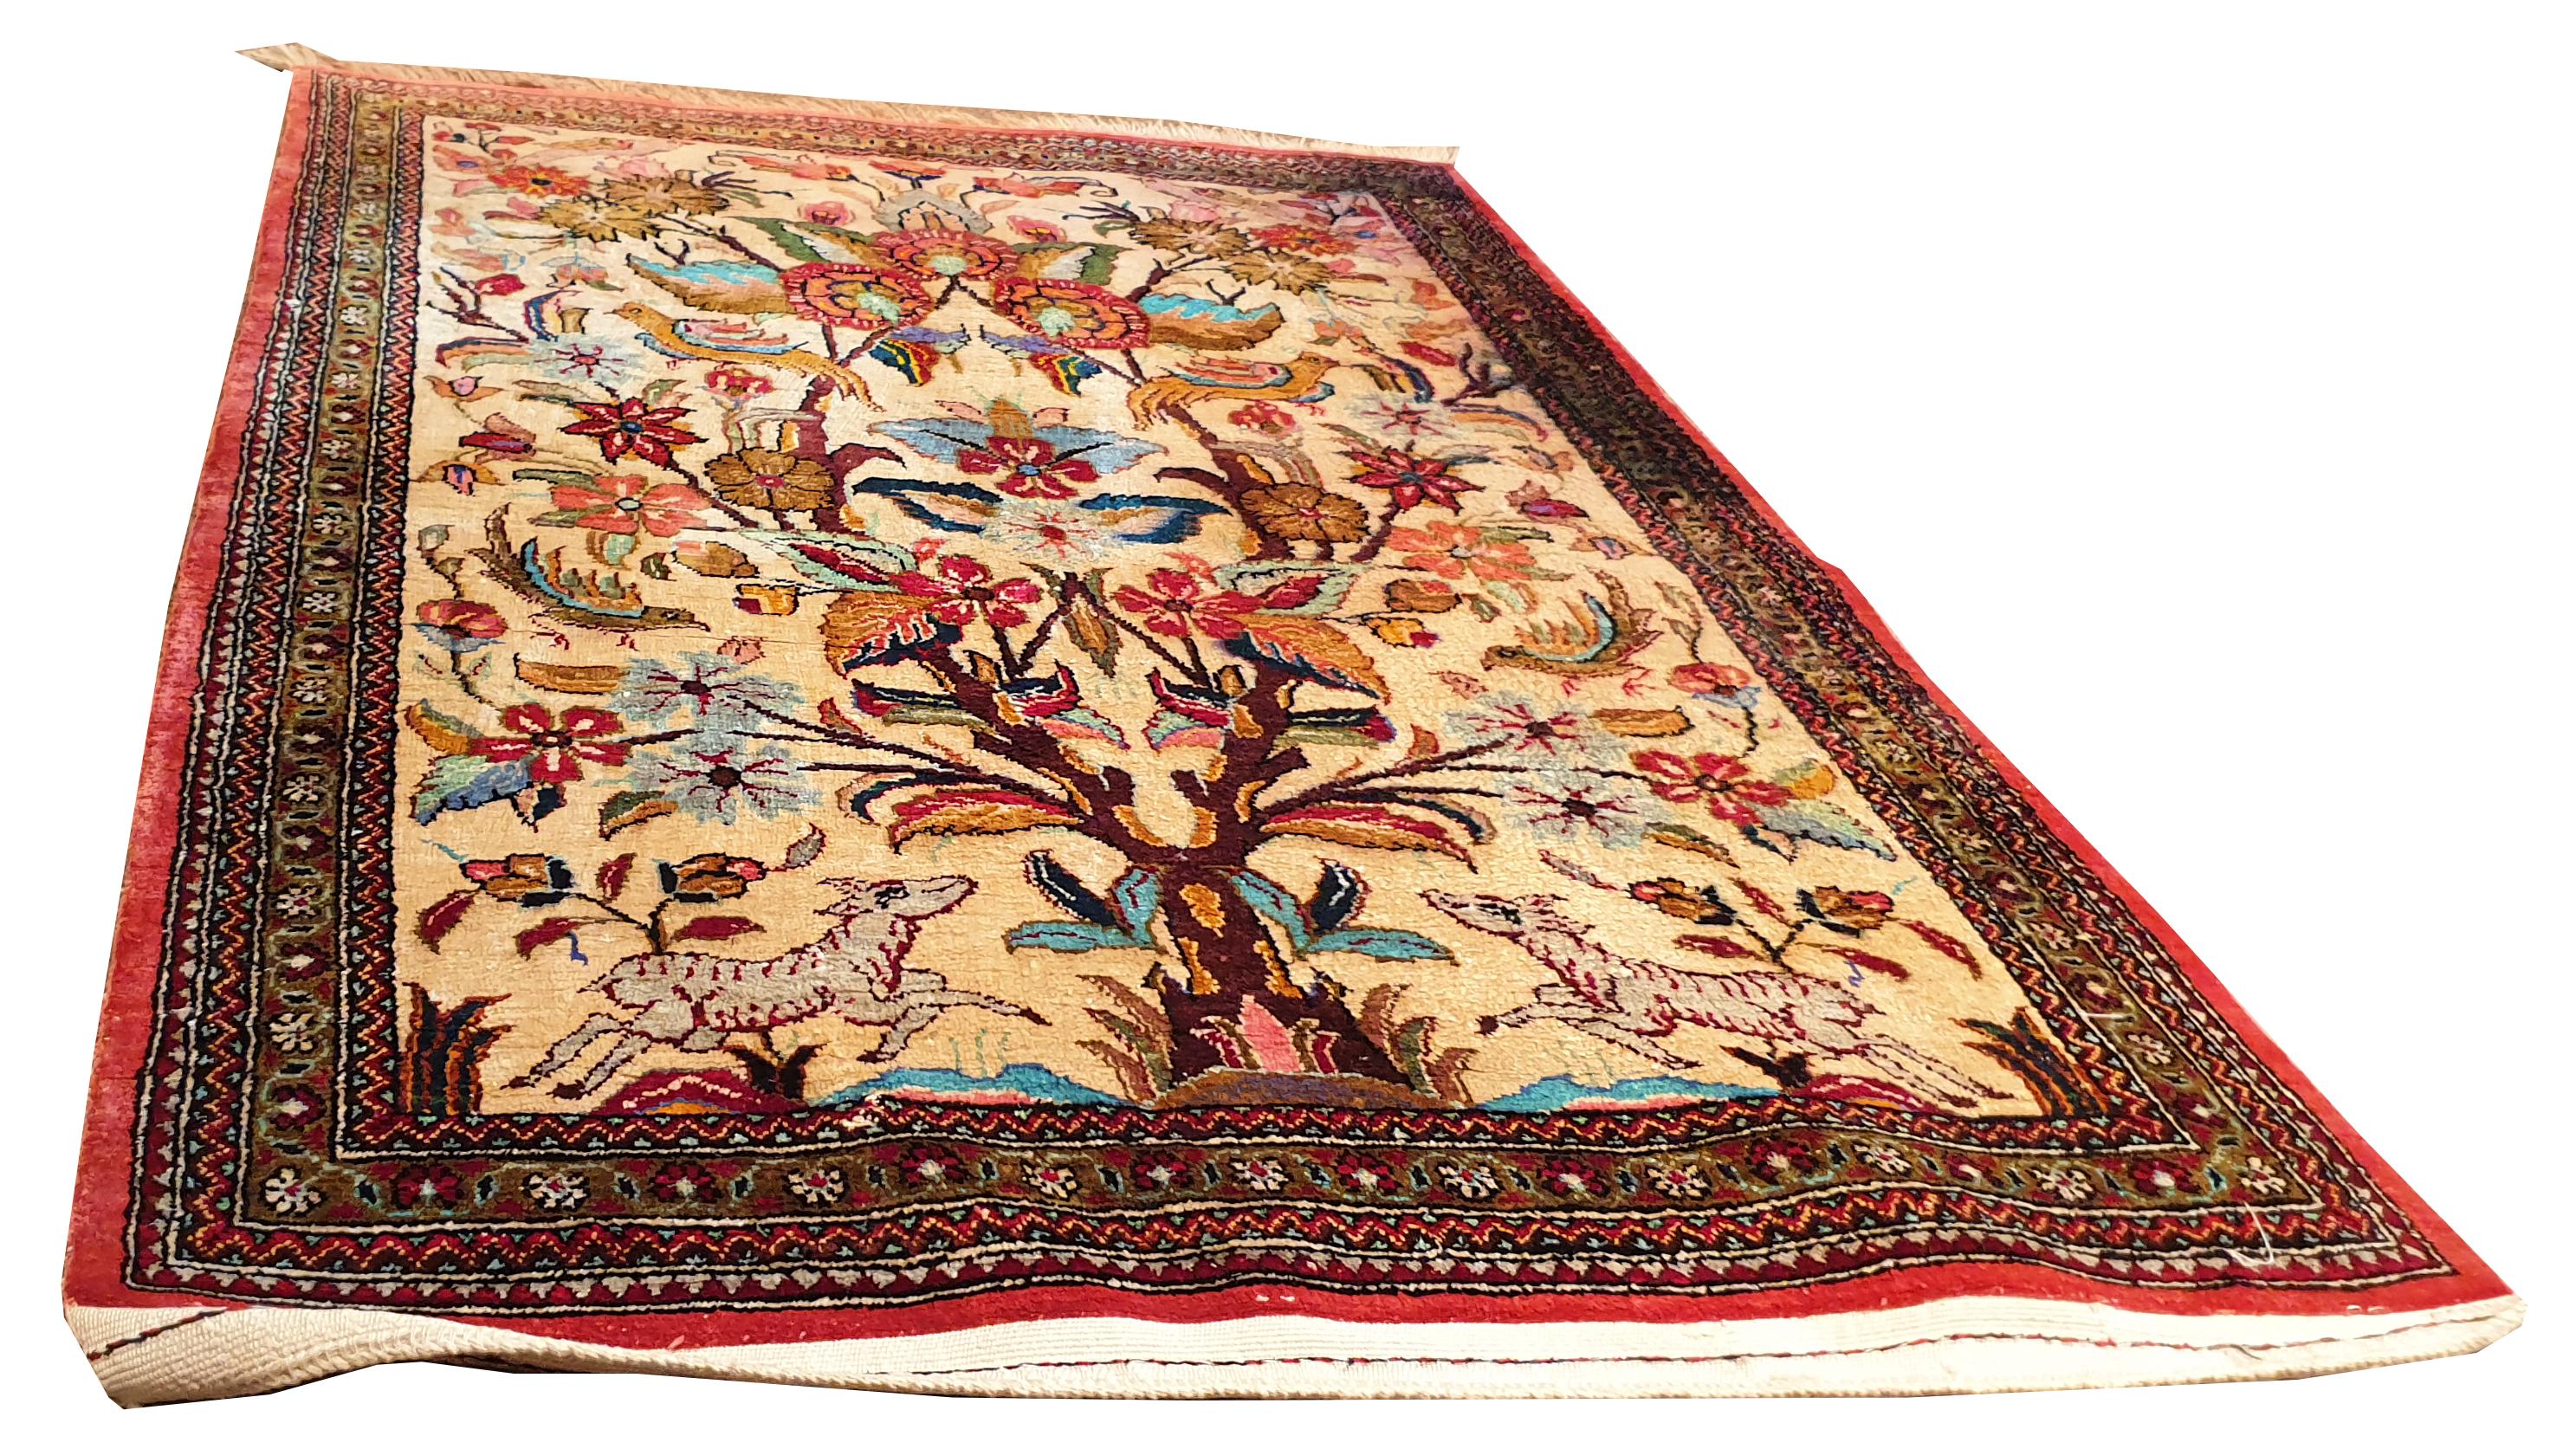 Hand-Knotted Oriental Carpet, 20th Century